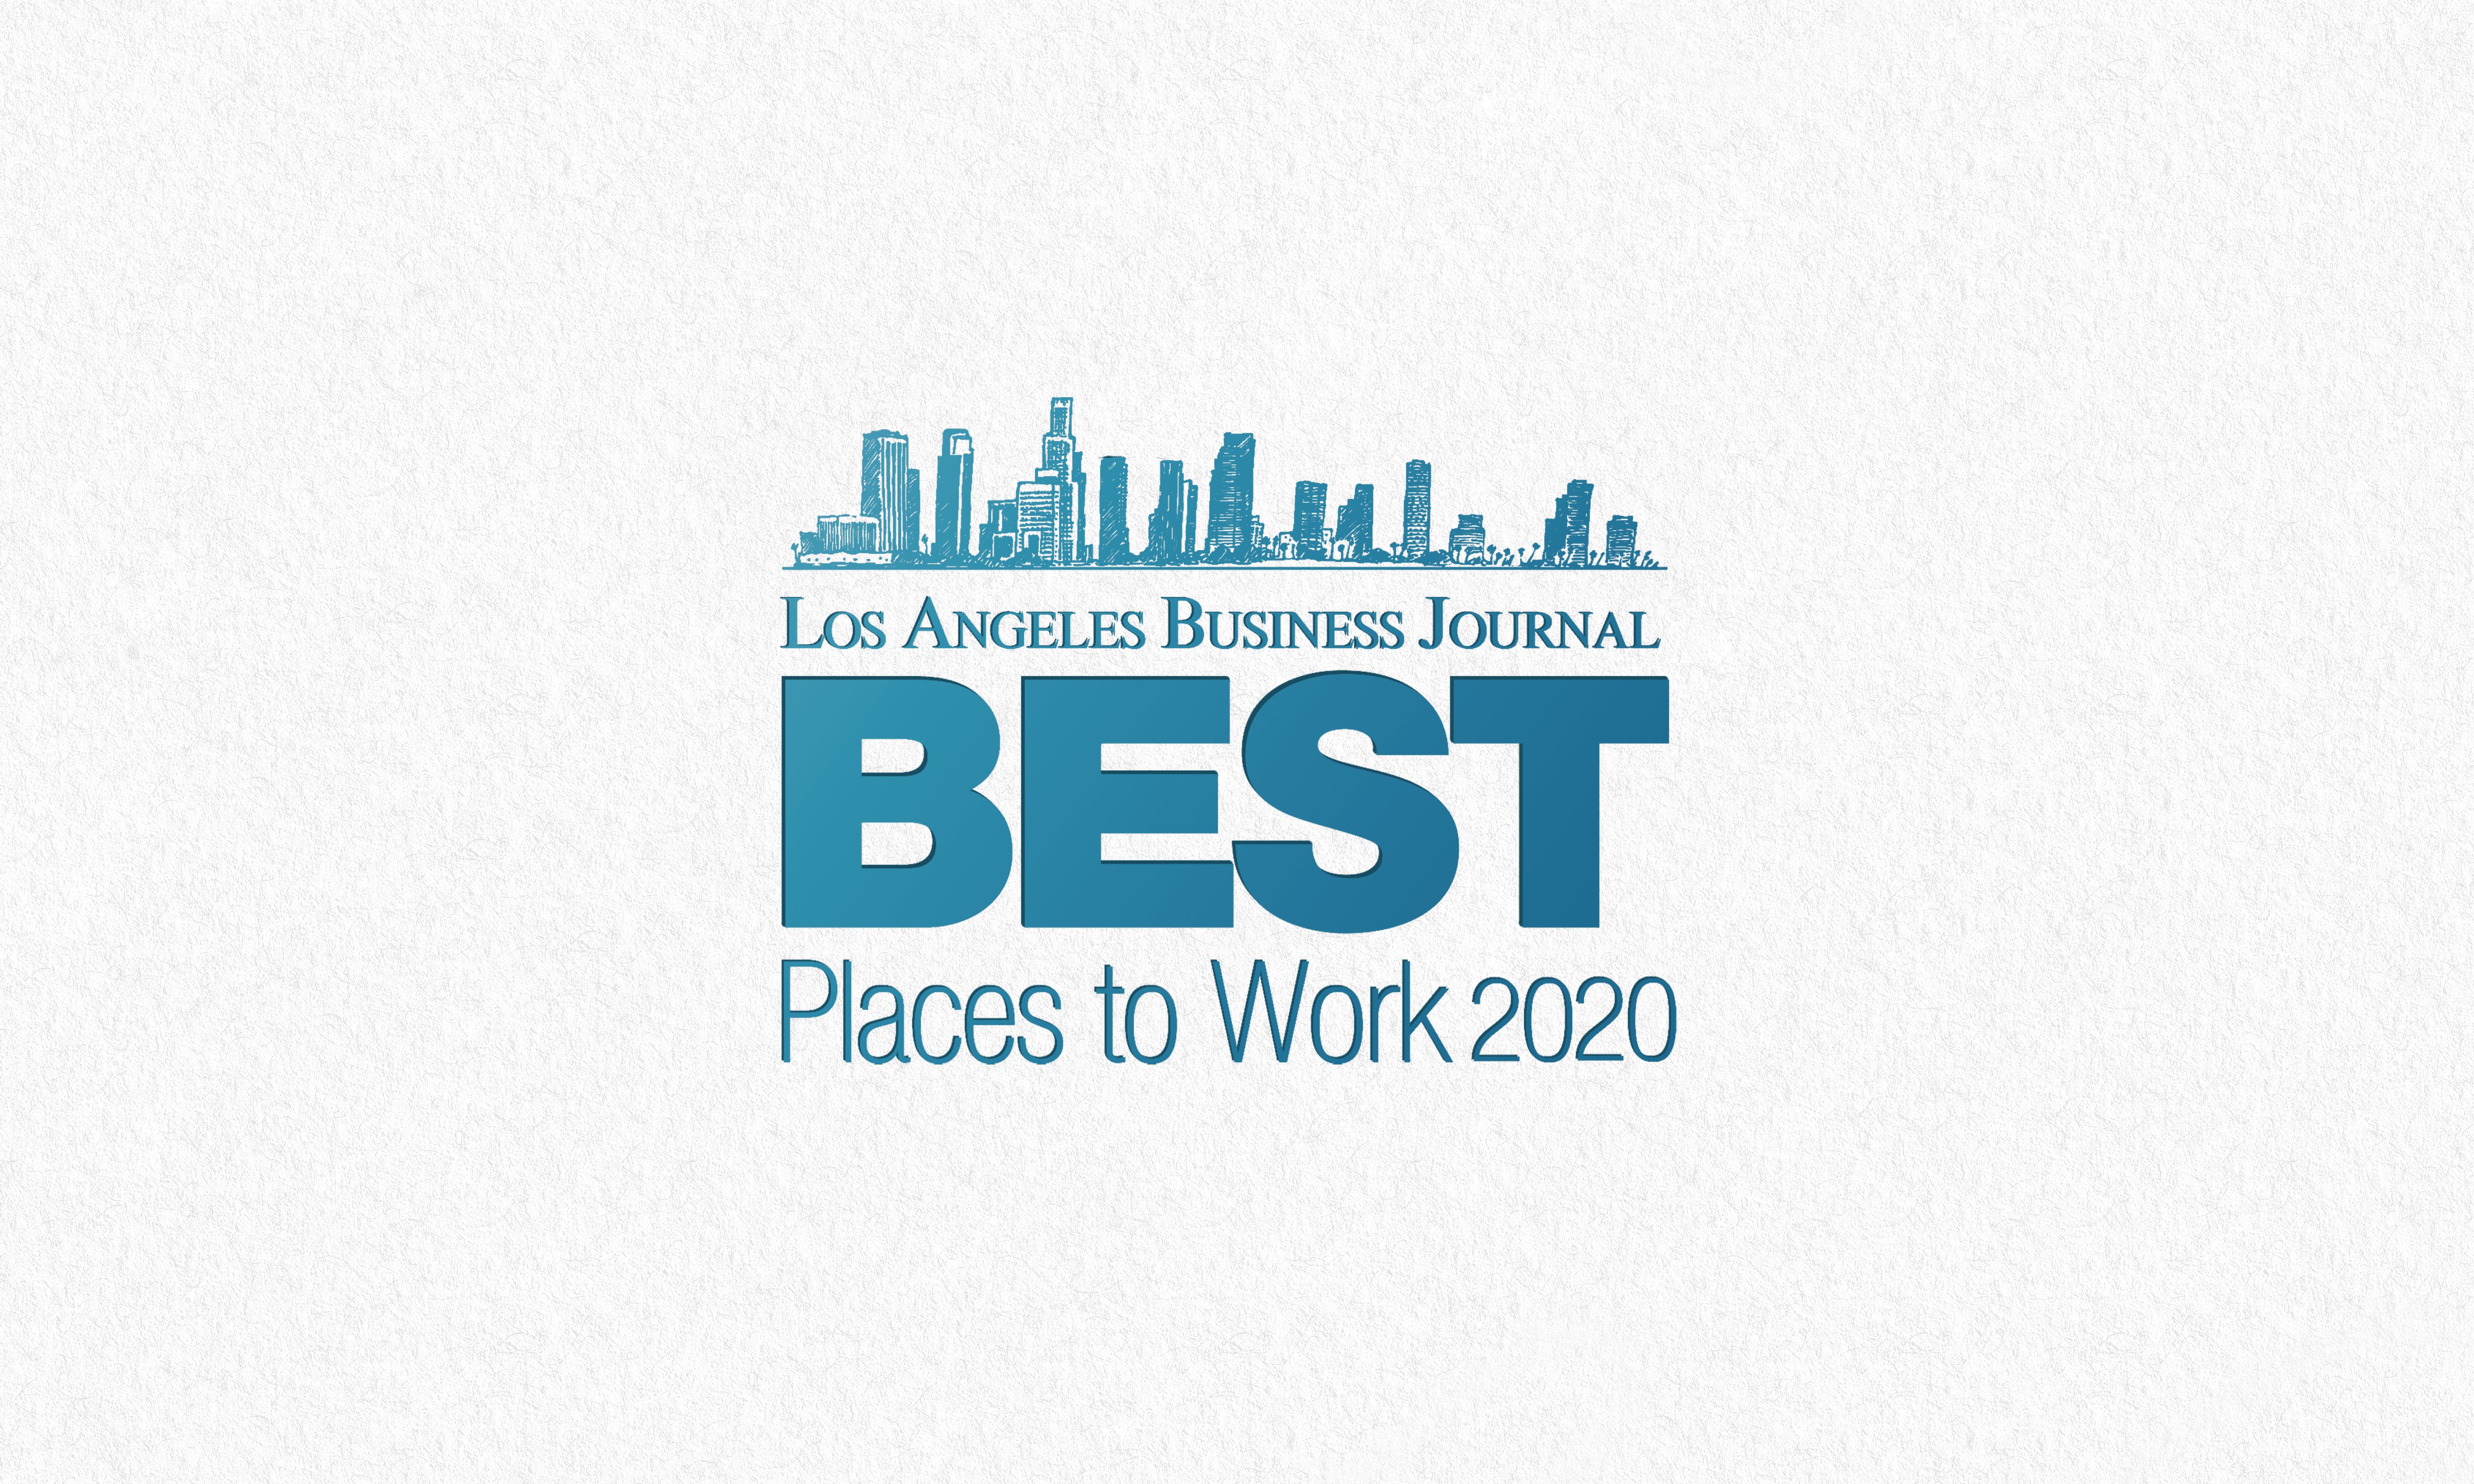 Los Angeles Business Journal: Best Places to Work in Los Angeles 2020